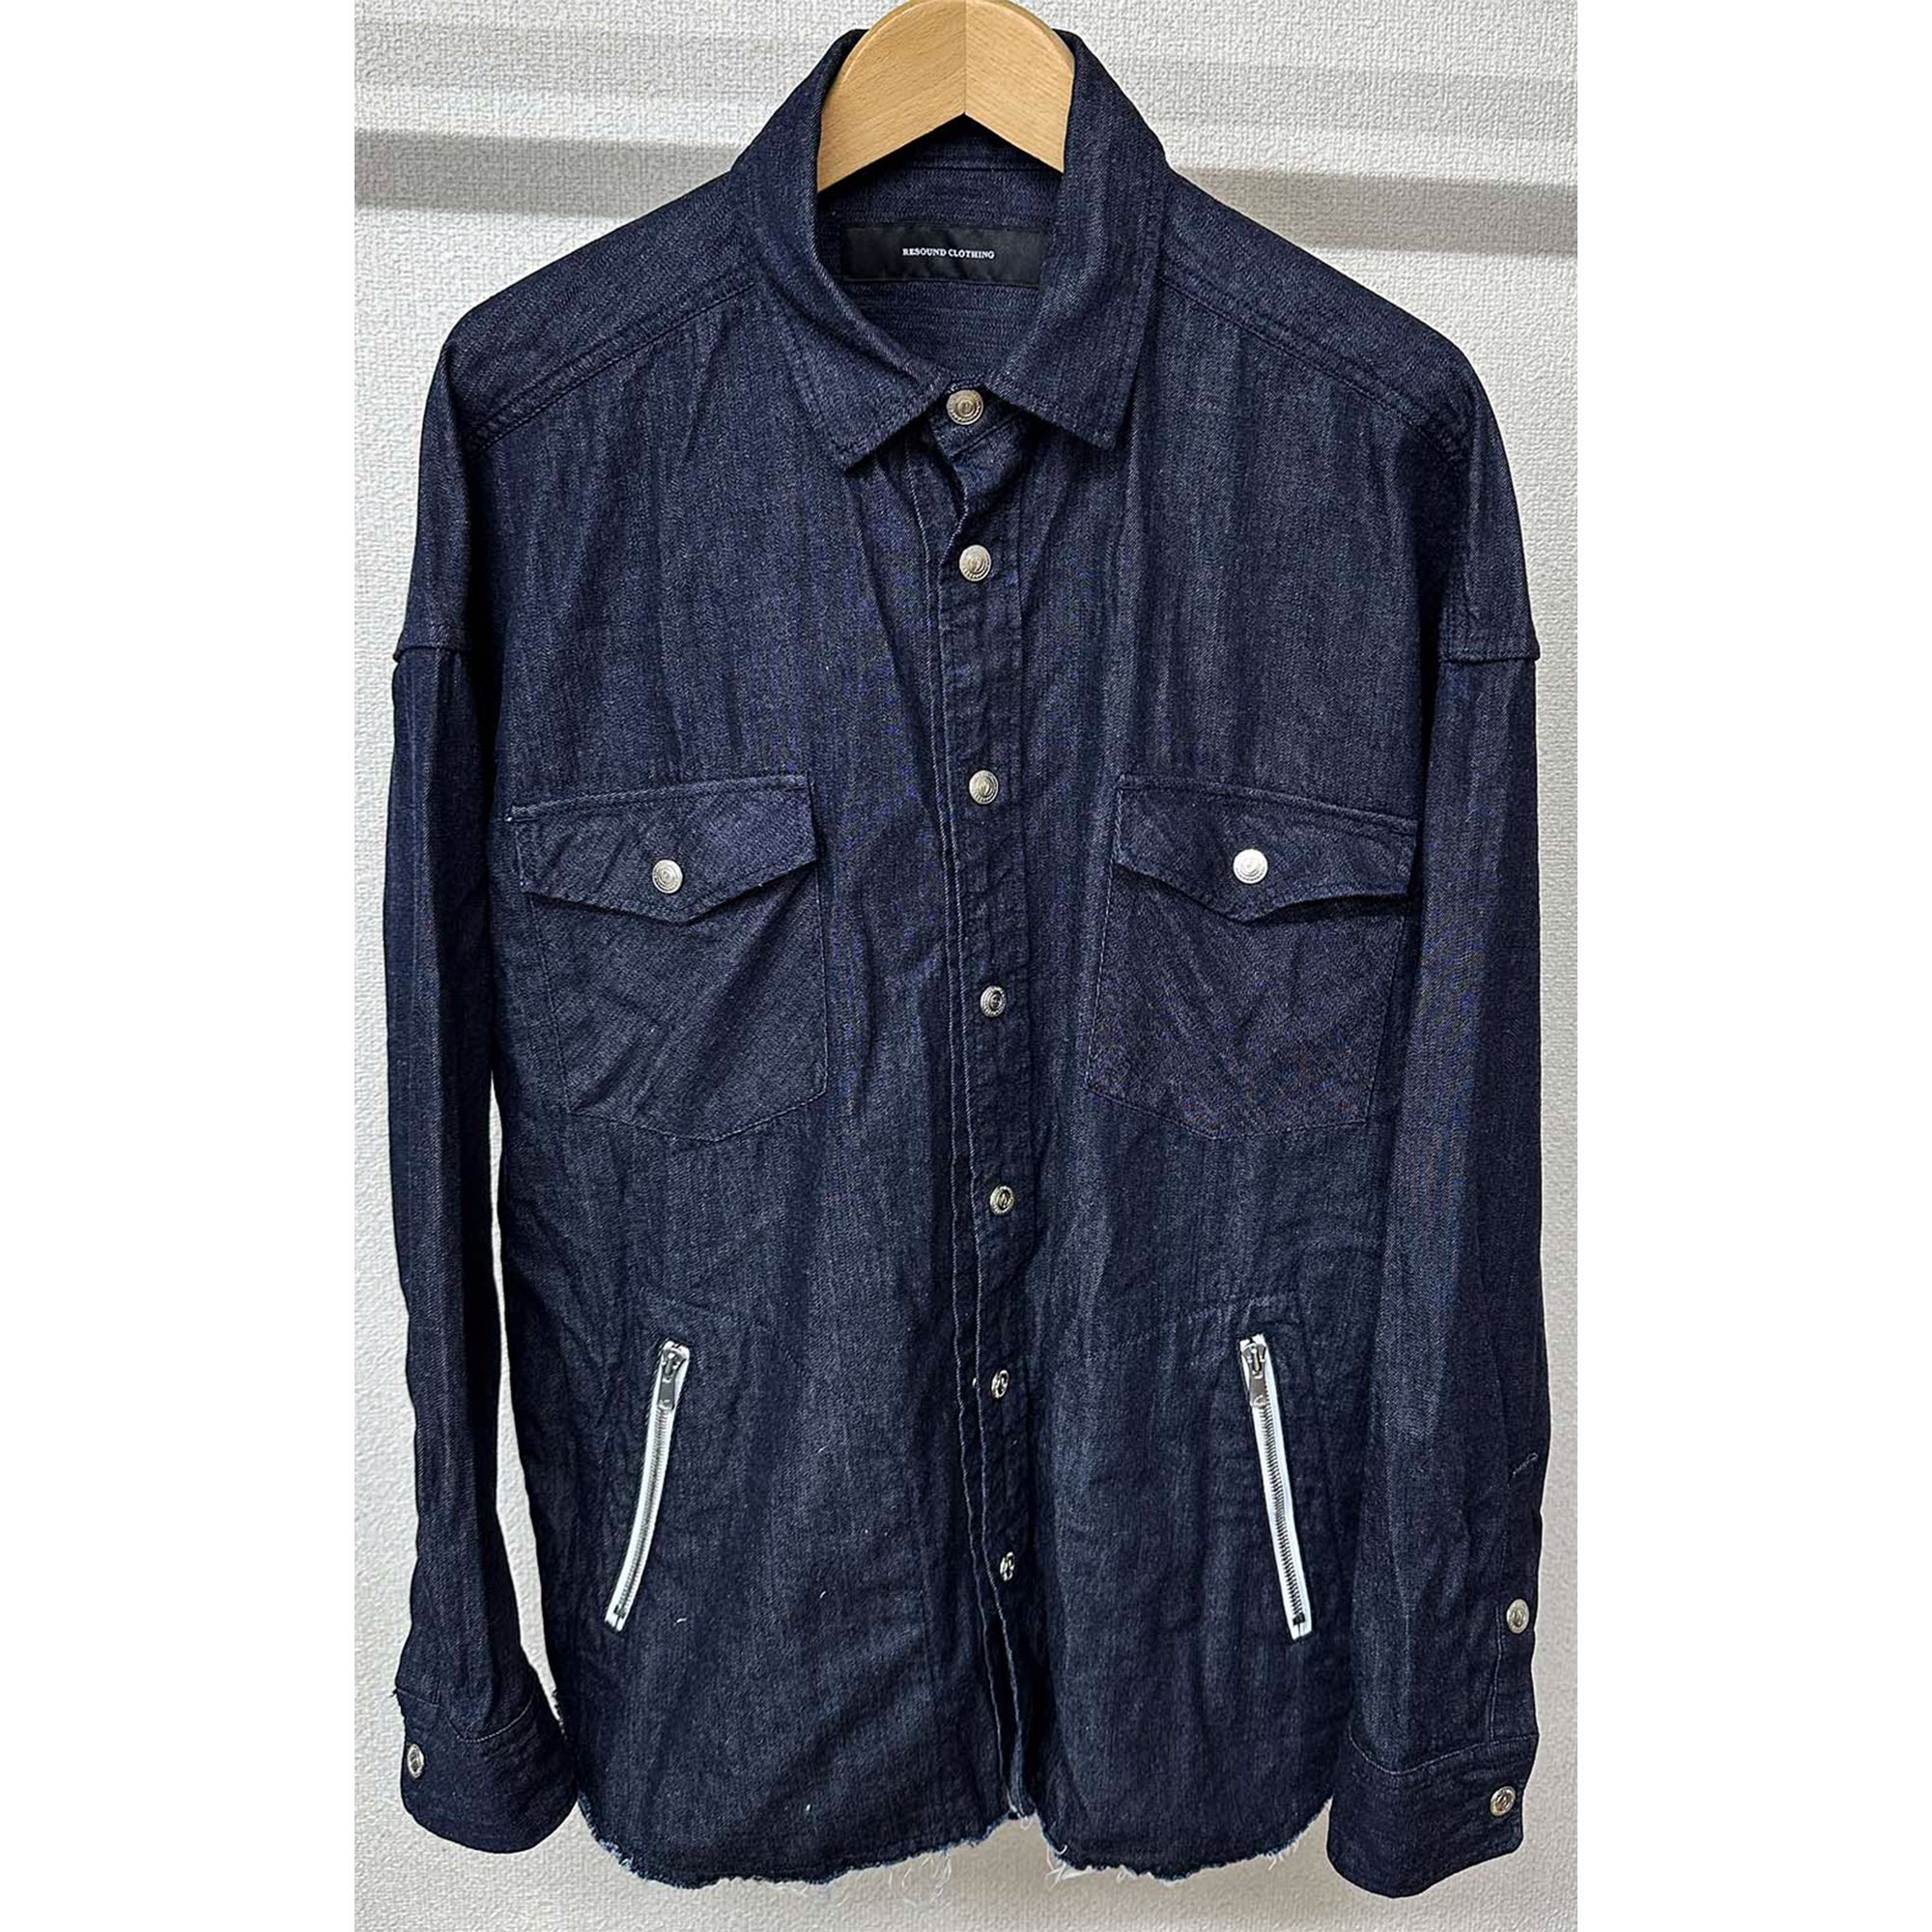 <img class='new_mark_img1' src='https://img.shop-pro.jp/img/new/icons1.gif' style='border:none;display:inline;margin:0px;padding:0px;width:auto;' />OVER DENIM shirts INDO/W